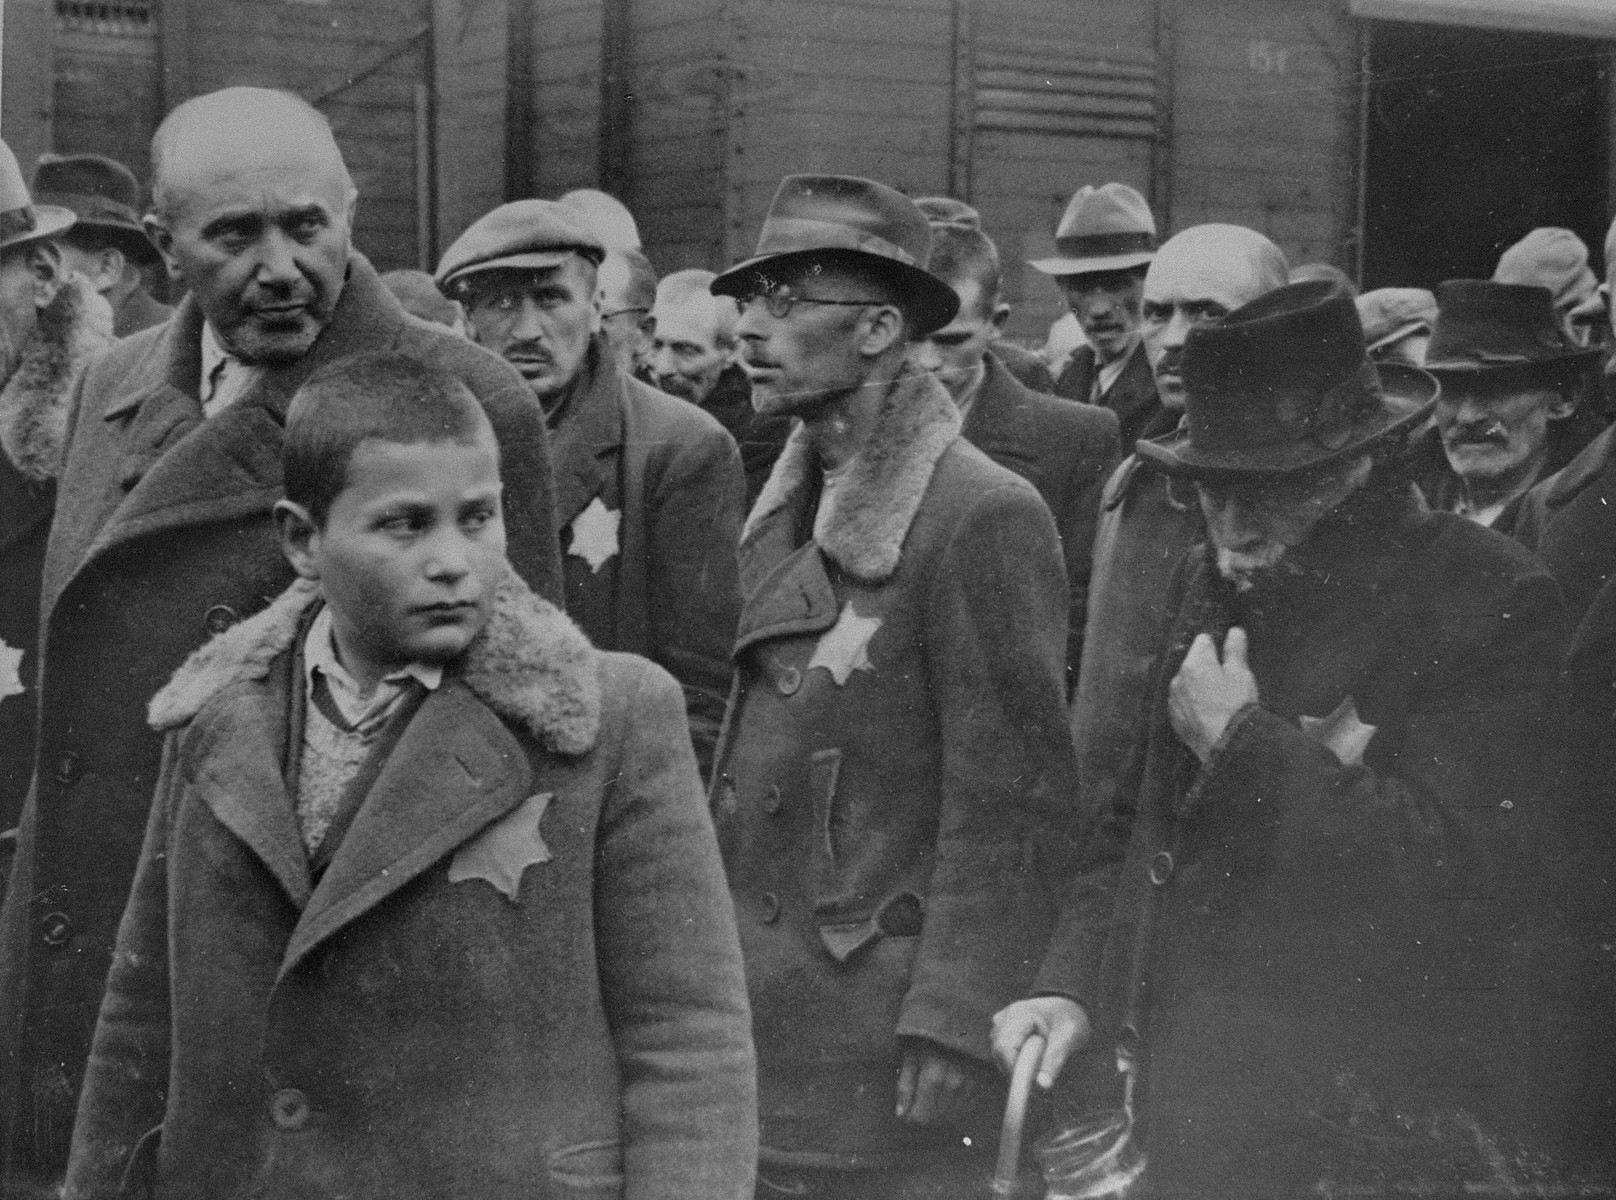 Jewish men and boys from Subcarpathian Rus await selection on the ramp at Auschwitz-Birkenau.

The man in the center wearing glasses is Sigmund Bruck, a mechanical engineer from Tab.  Bruck was denounced as a communist, arrested and deported to Nagy Kamizsa.  He was eventually sent to Auschwitz-Birkenau and then to Gleiwitz, where he was killed by a guard during an escape attempt.  To his left is Mr. Smilazick and his son.